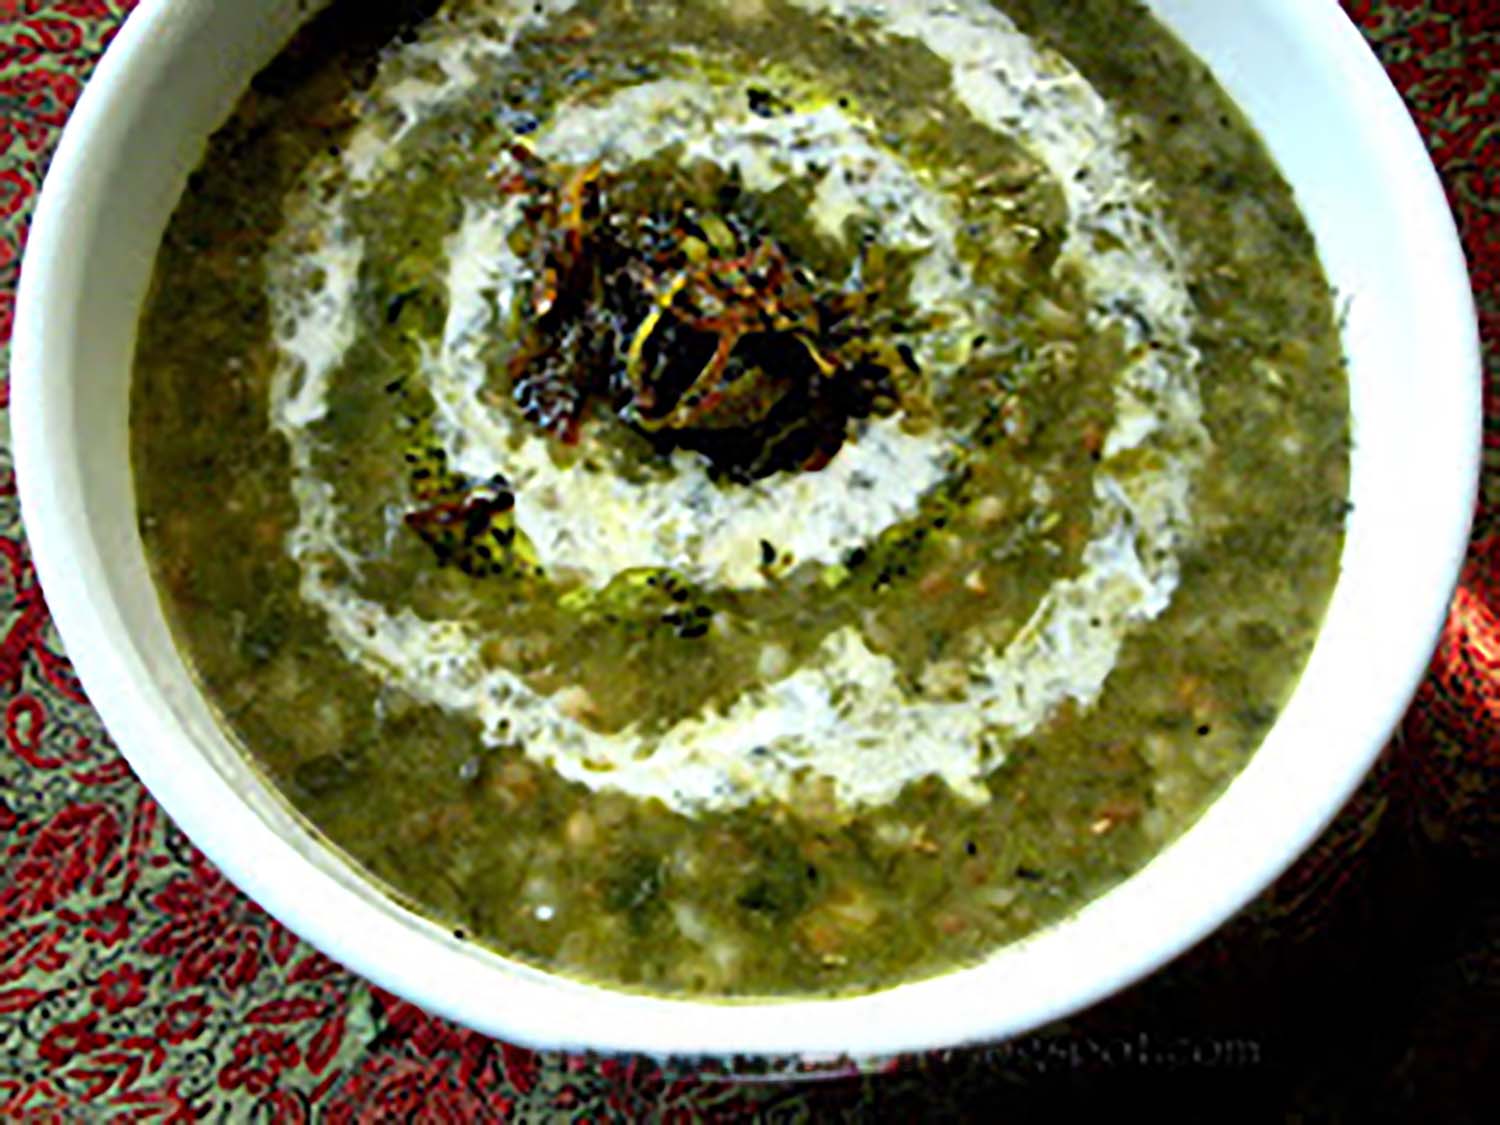 Ash-e Jo - Barley Stew with Beans and Herbs